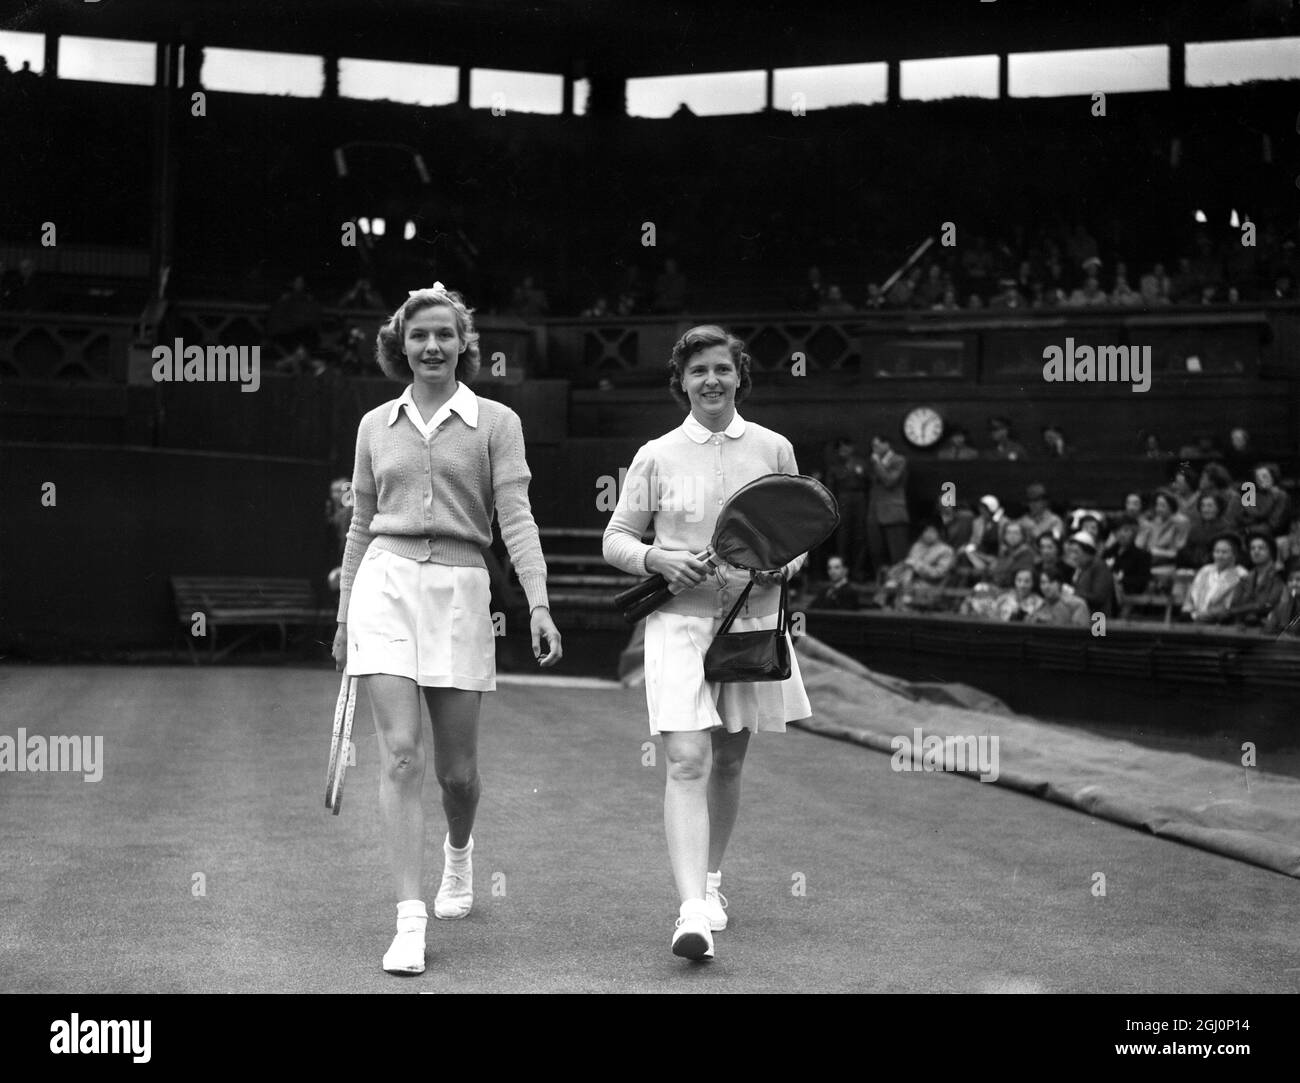 Mrs A J Mottram of Great Britain (left) and Mrs W du Pont (right) of the United States , walk out onto the centre court of the All England Club for their match in the first round of the Ladies ' Single Tennis Championship at Wimbledon in London . Mrs du Pont won the game : 6 - 3 6 - 4 . 26th June 1951 Stock Photo